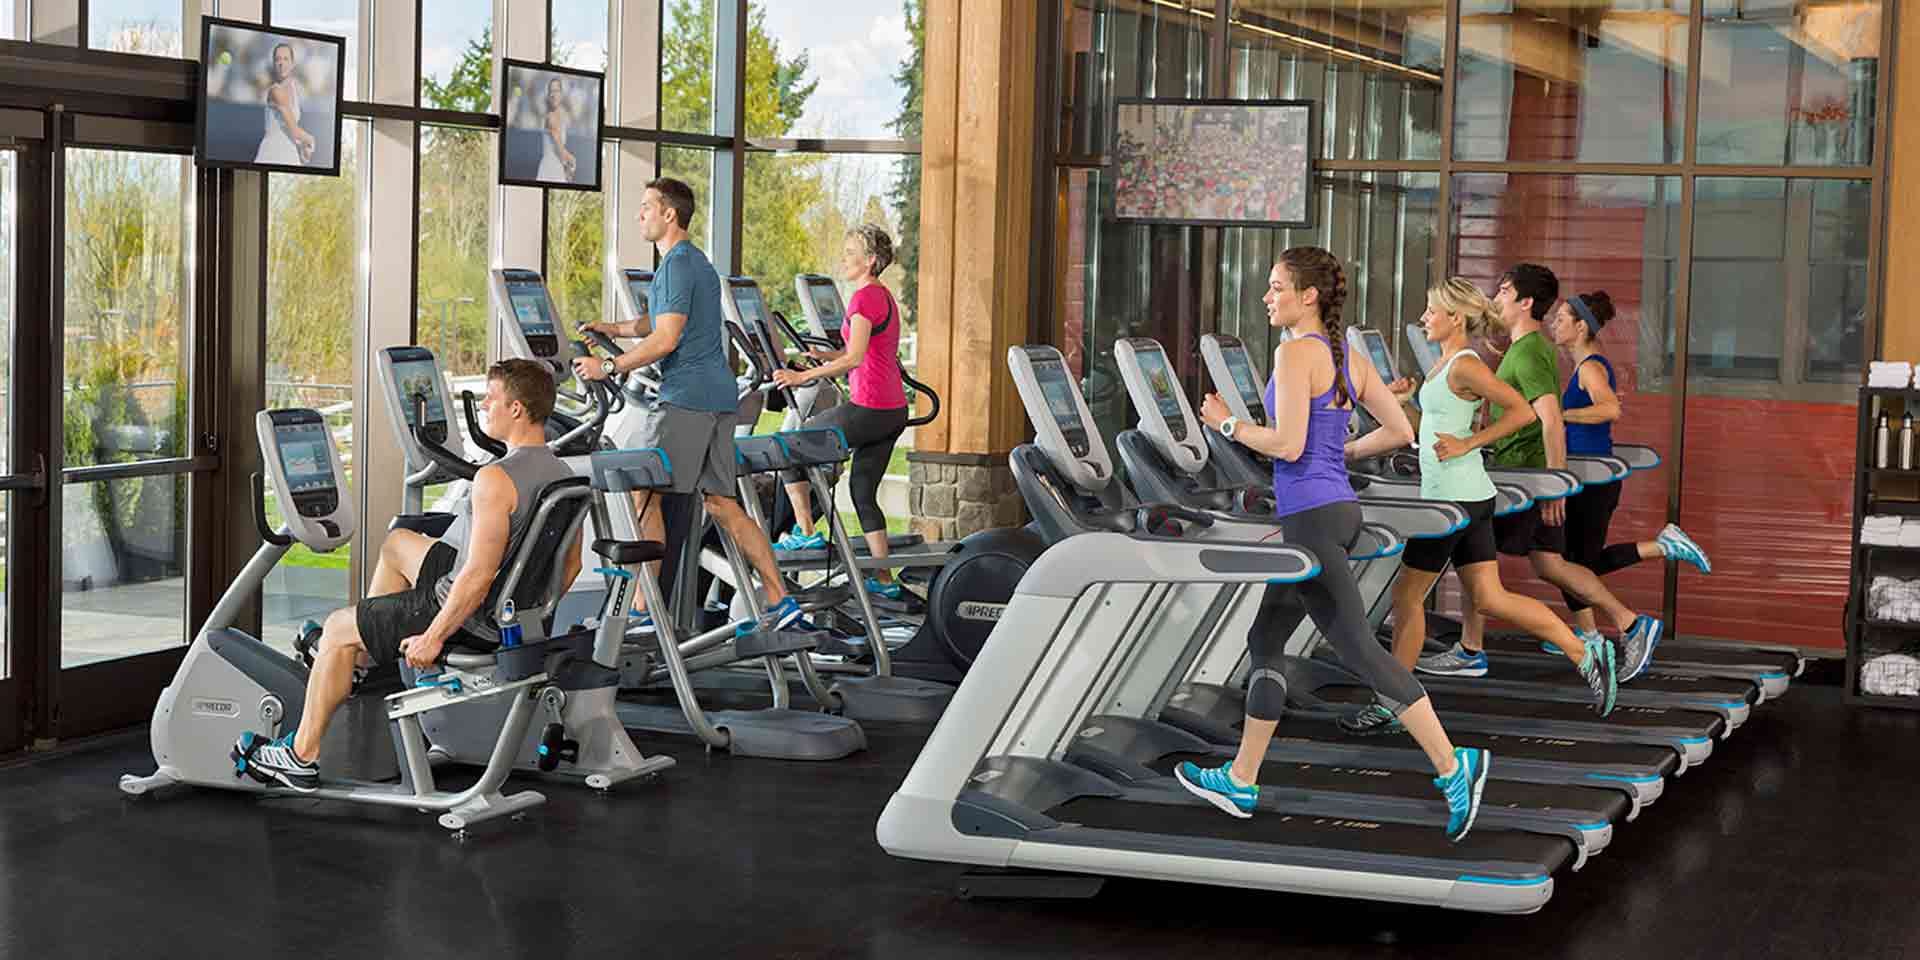 5 Things to Look for when Buying Gym Equipment